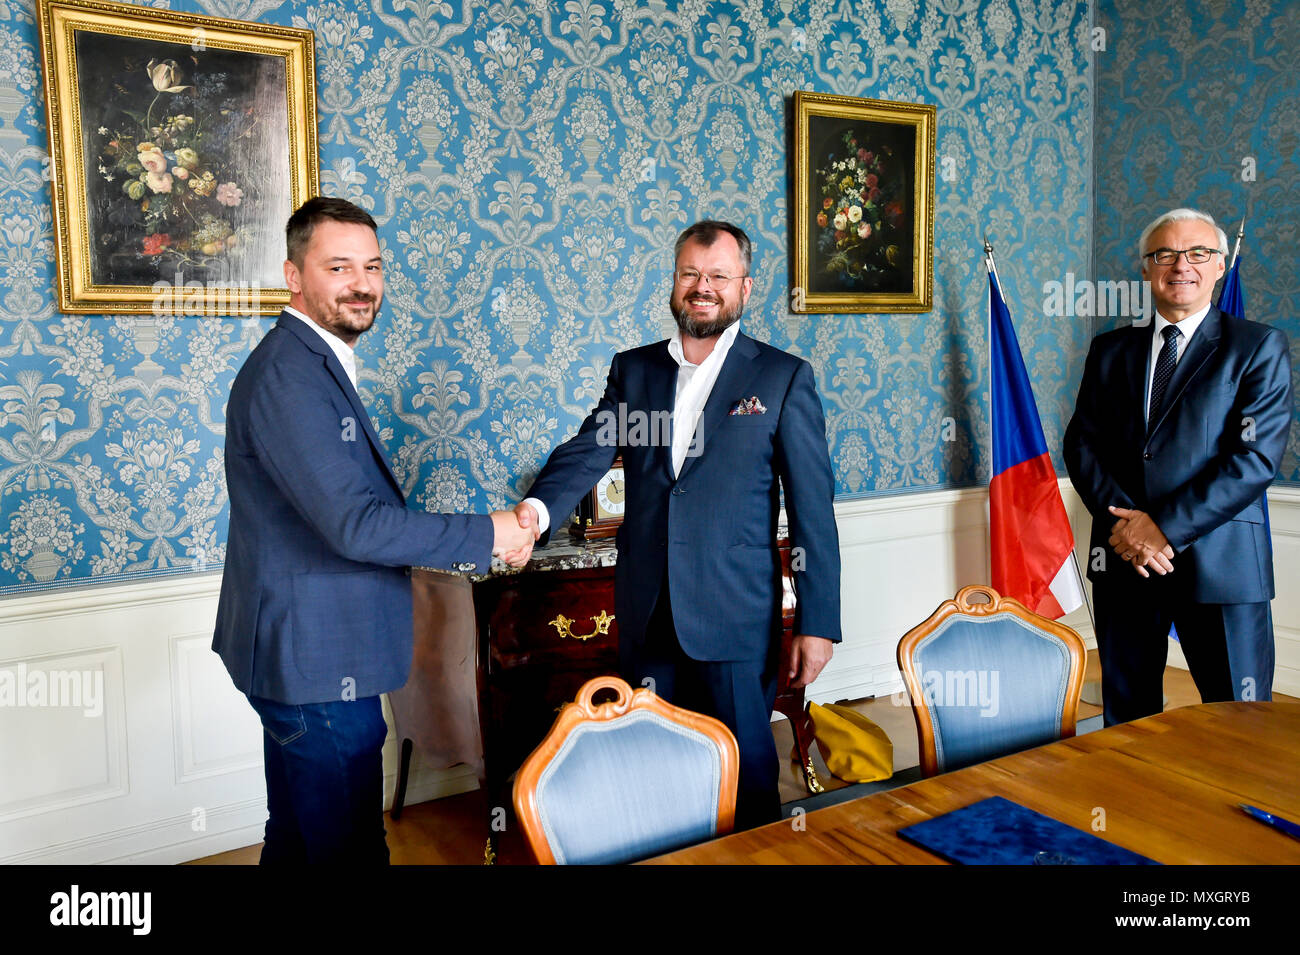 The National Film Archive (NFA) and the Film and Television School of the Academy of Performing Art (FAMU) in Prague made an agreement on the digitisation of Czech films today, on Monday, June 4, 2018. The agreement, signed by FAMU Dean Zdenek Holy, left, and NFA director Michal Bregant, guarantees that the digital restoration would be carried out in cooperation with the living film-makers, primarily the director, photographer and sound mixer, that their testimonies and expert opinions will be recorded. On the photo right there is Culture Minister Ilja Smid. (CTK Photo/Vit Simanek) Stock Photo